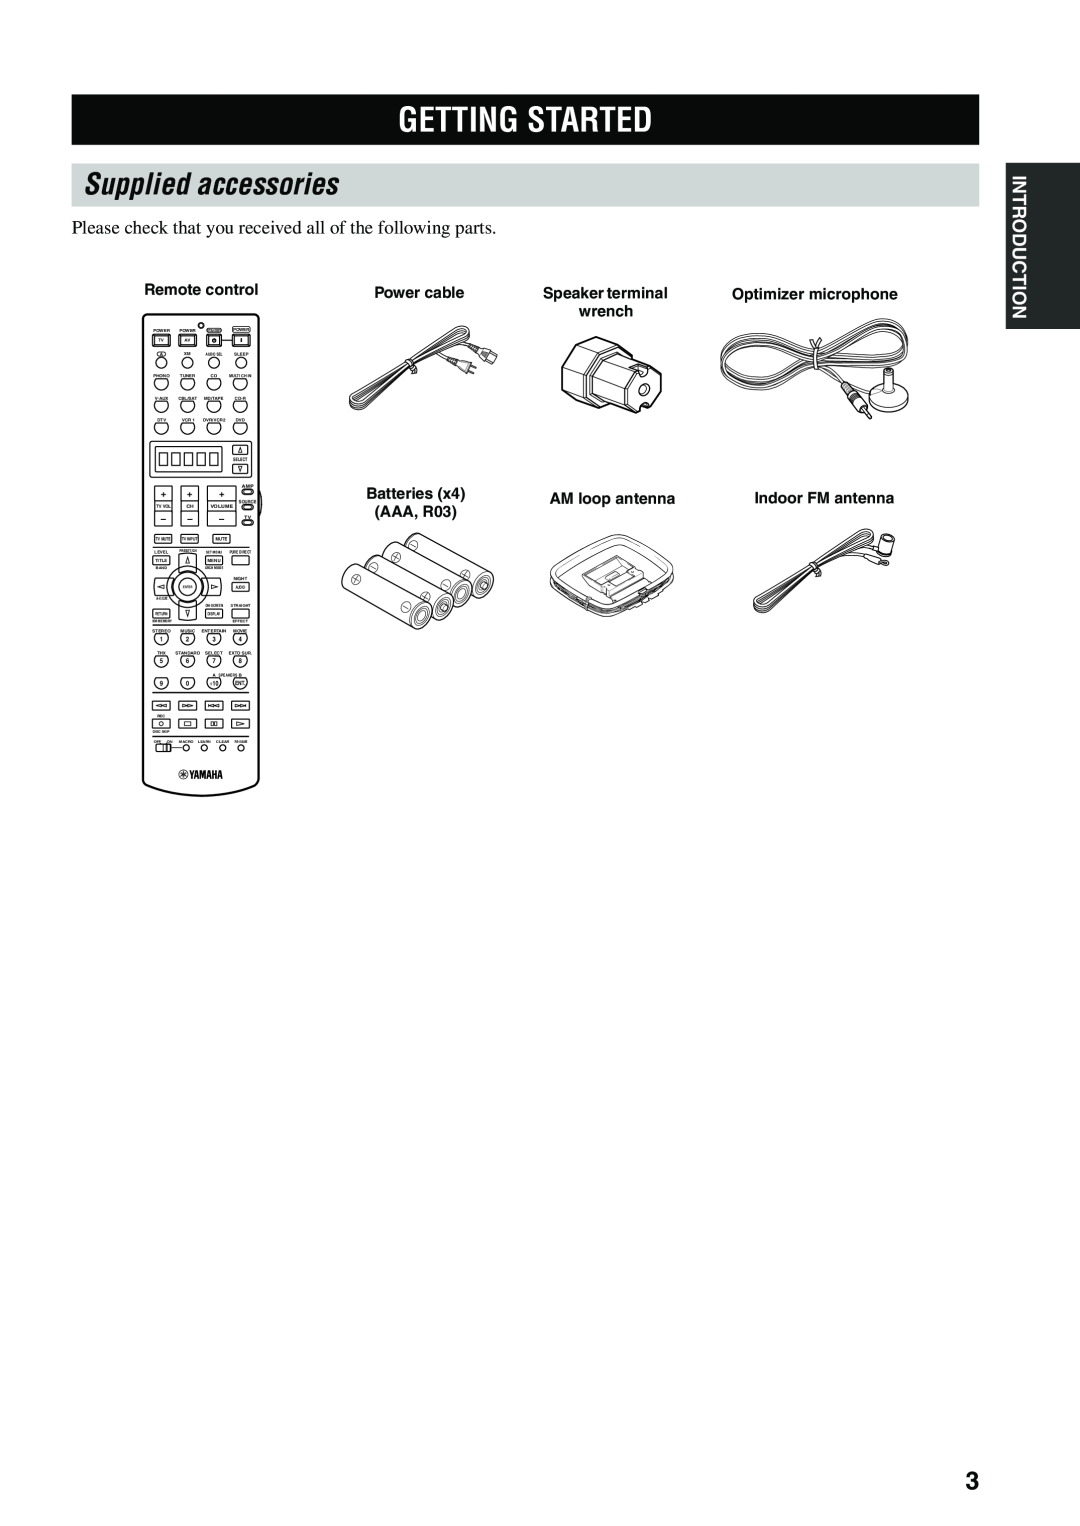 Yamaha HTR-5990 owner manual Getting Started, Supplied accessories 